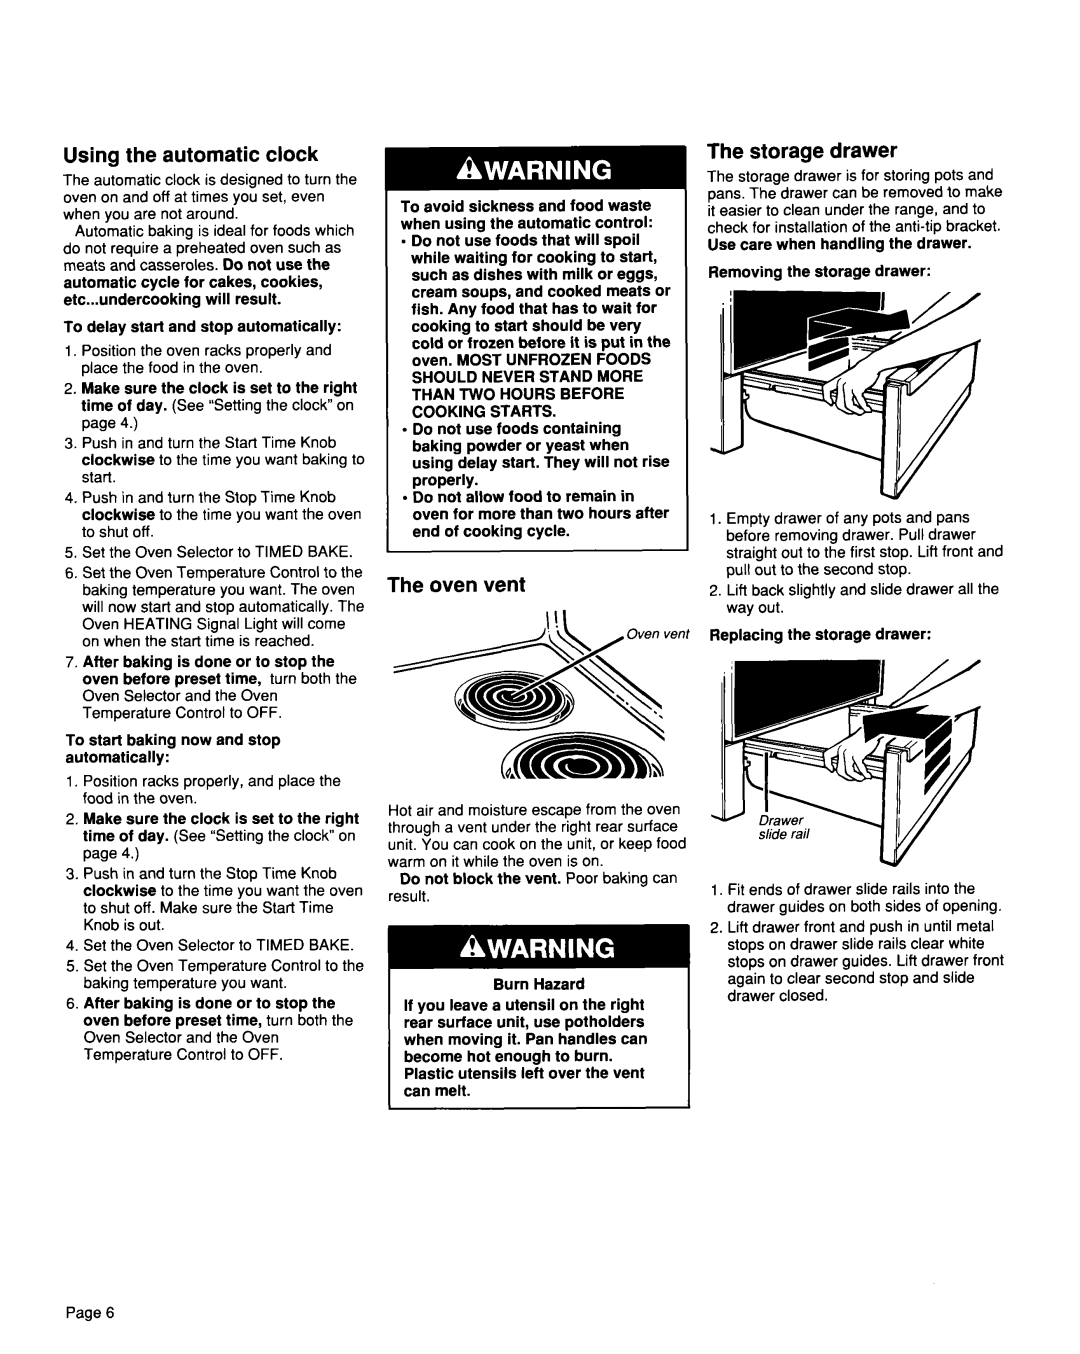 Whirlpool TER46WOW installation instructions Using the automatic clock, The oven vent, The storage drawer 